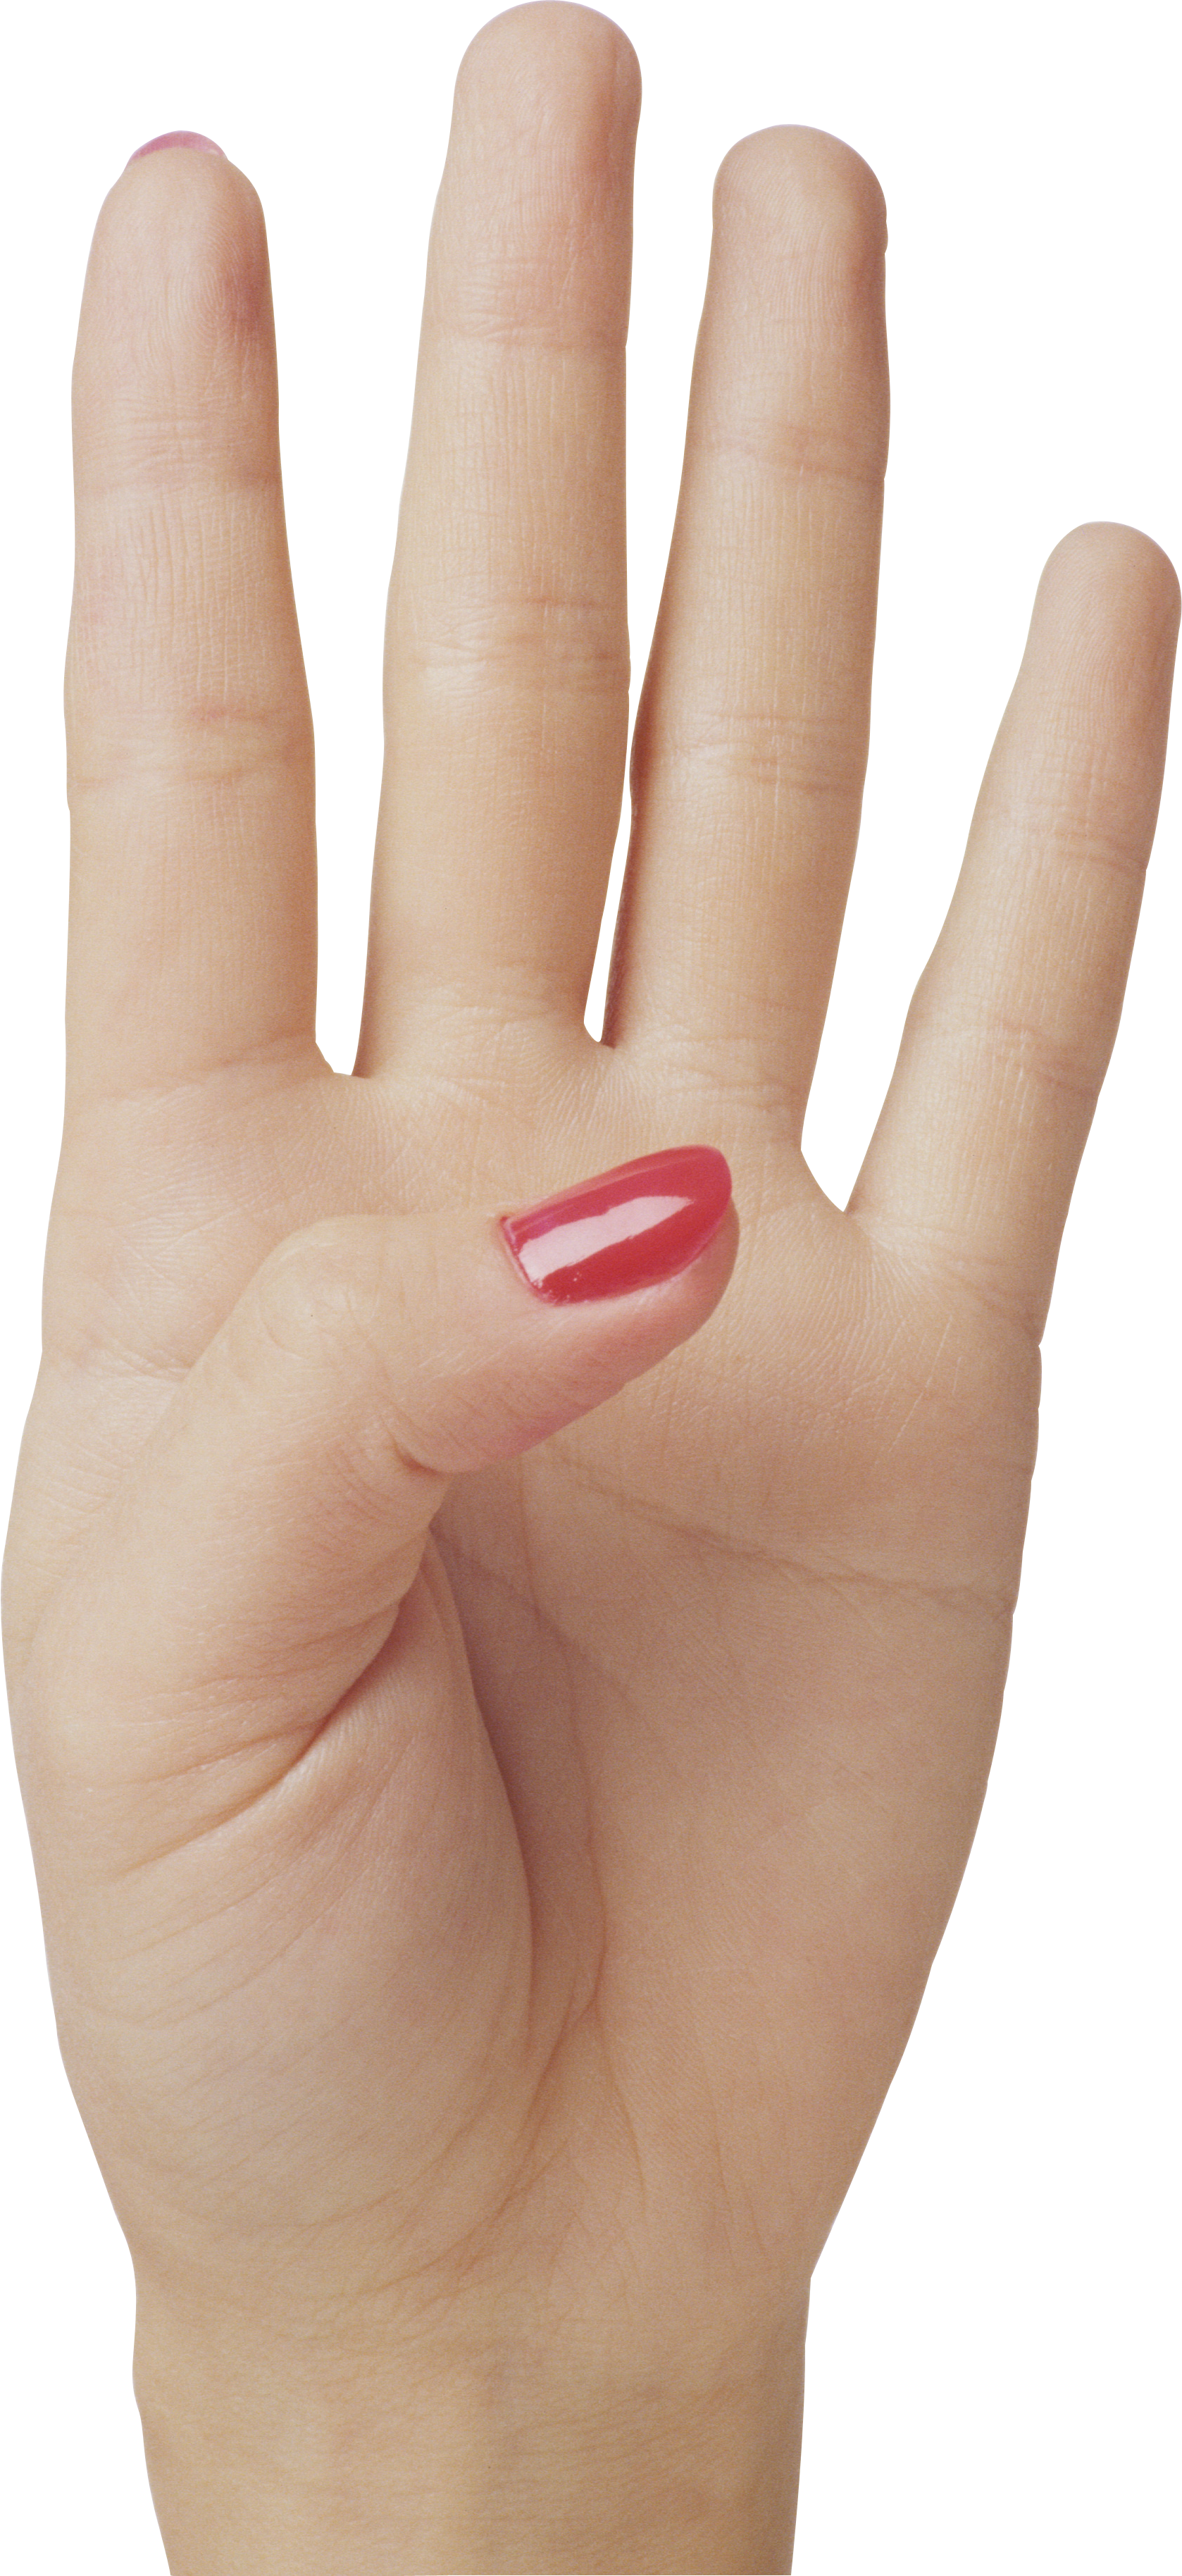 Four finger png image. Nail clipart womens hand